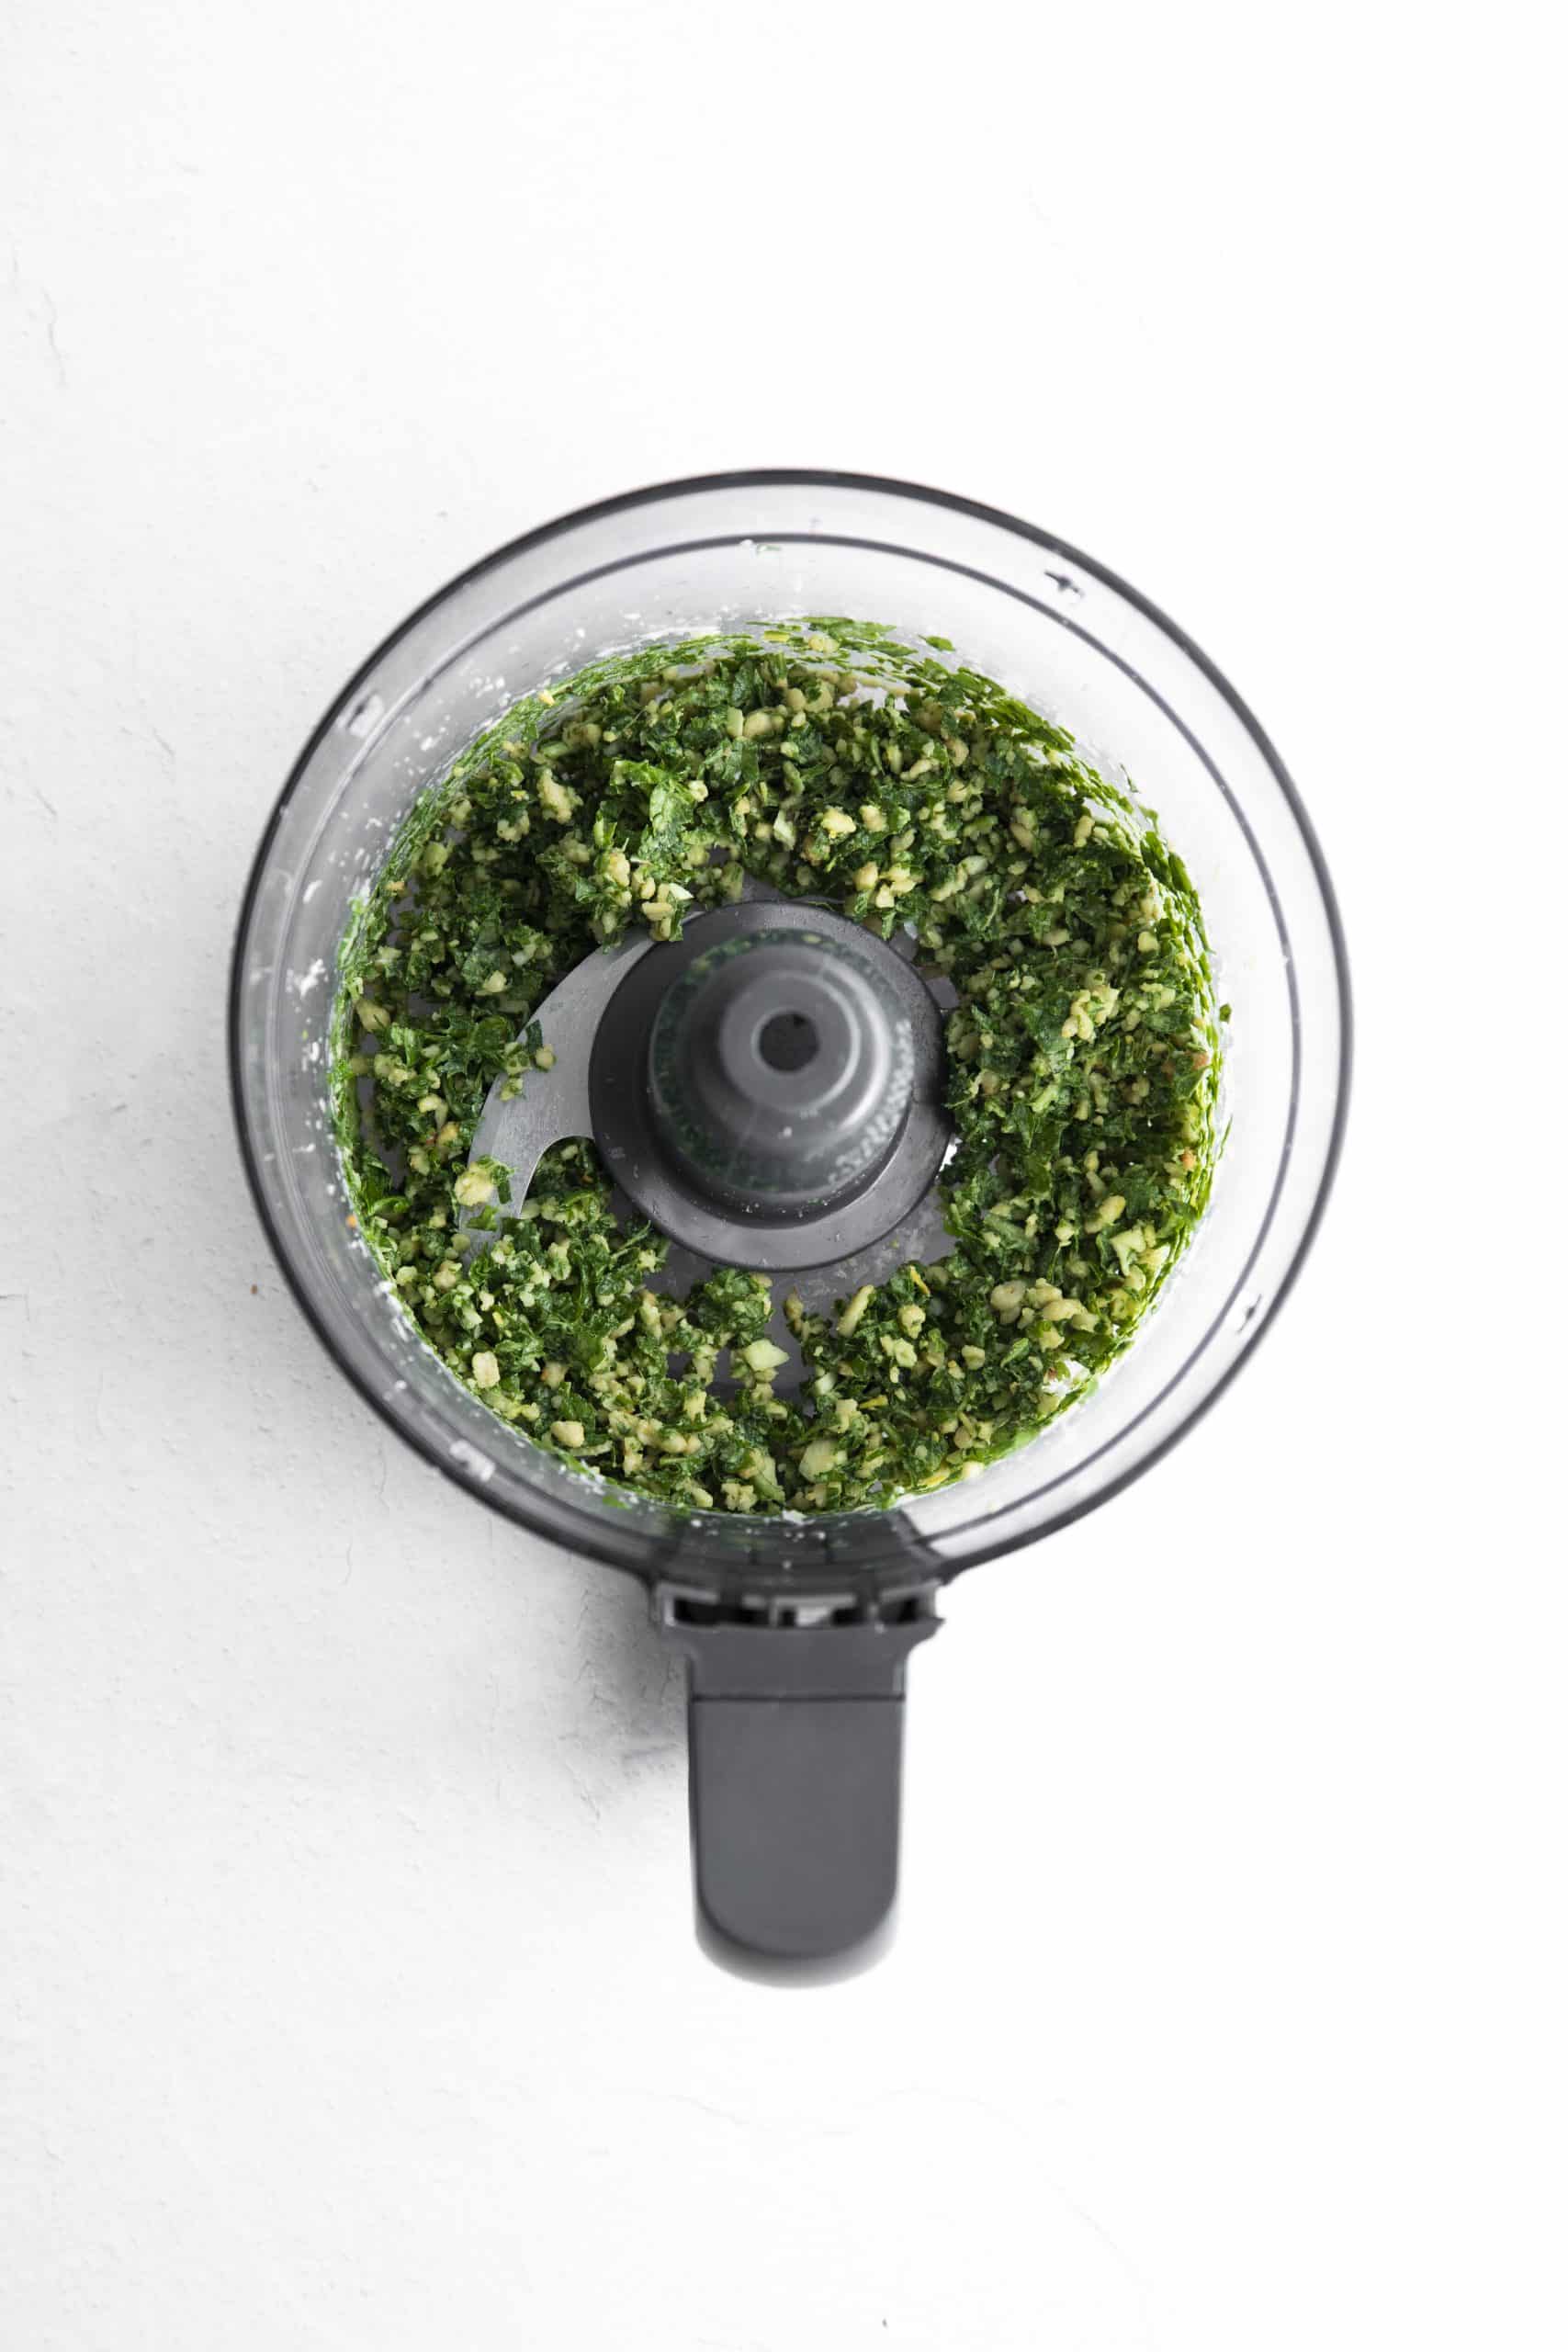 basil pesto in a food processor, before oil is added